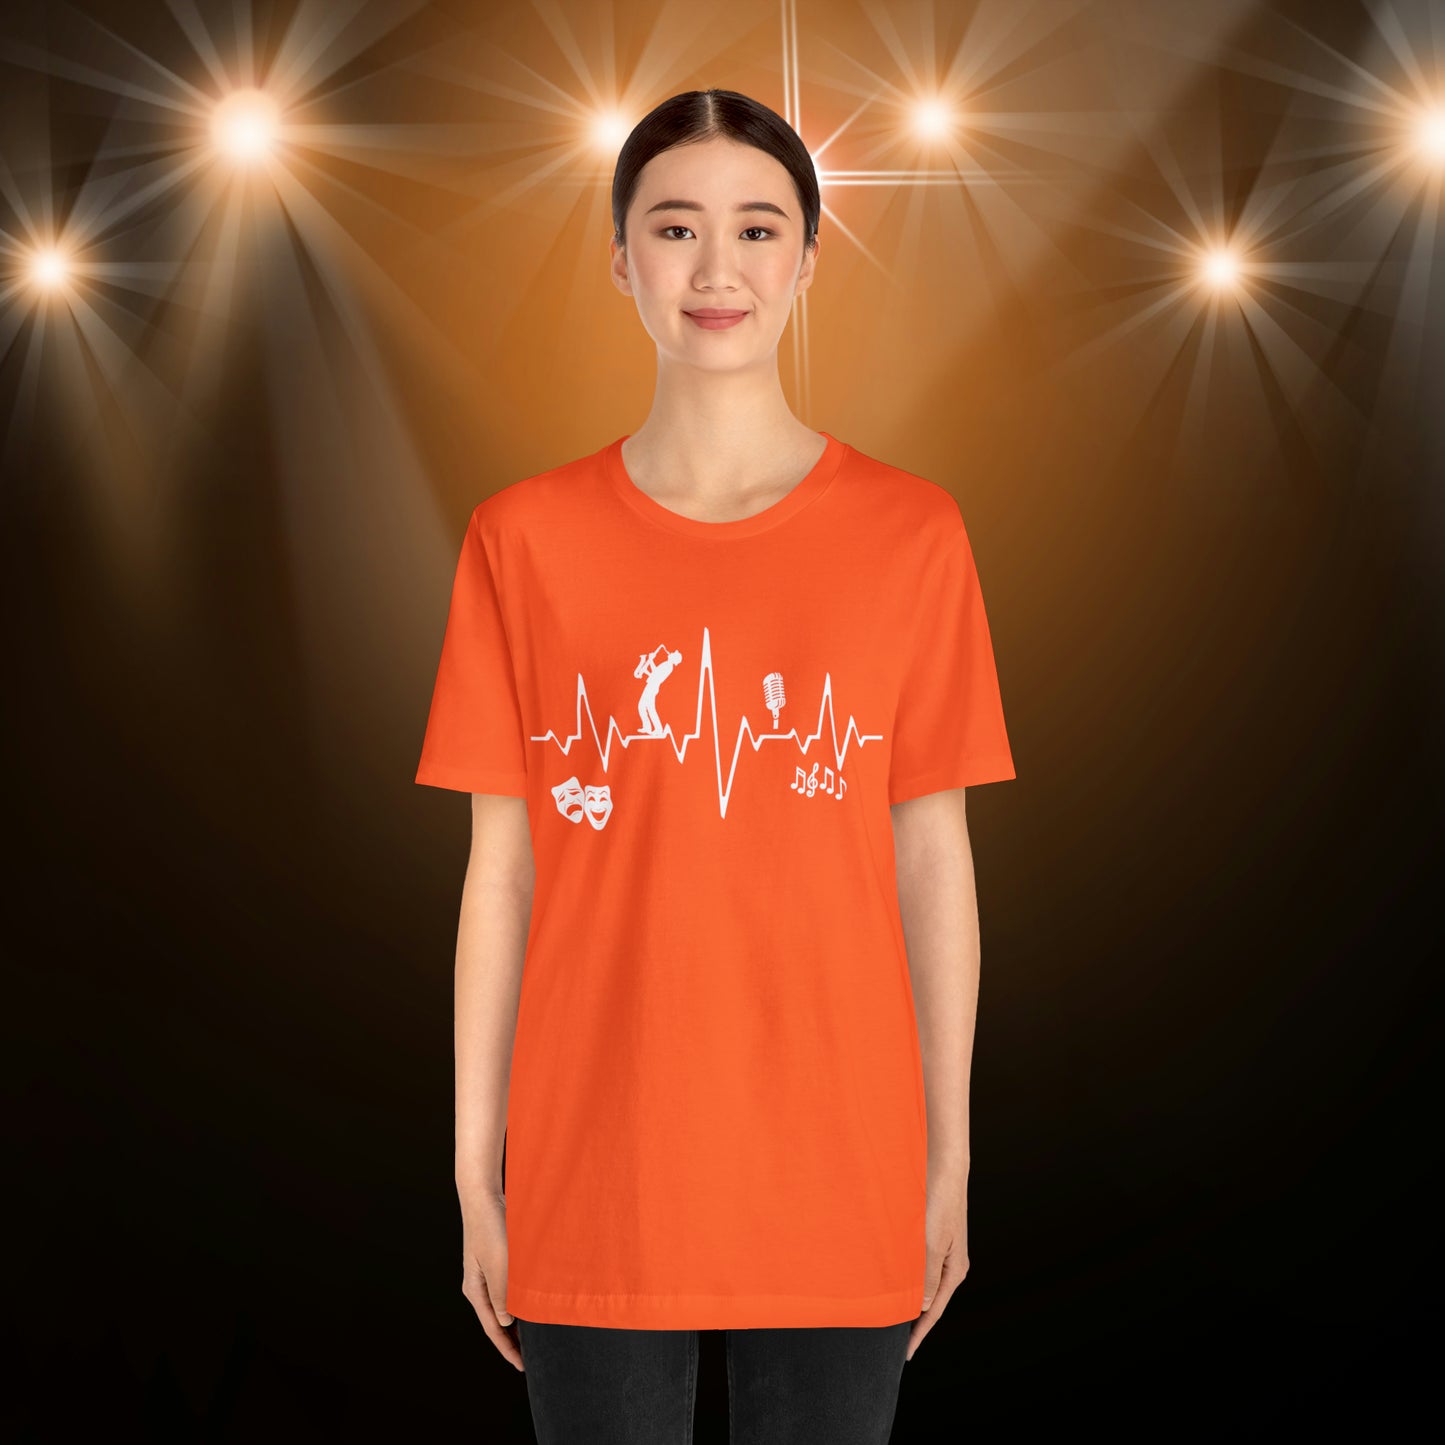 Beating Heart of Entertainment Unisex T-shirt - choice of 10 colors